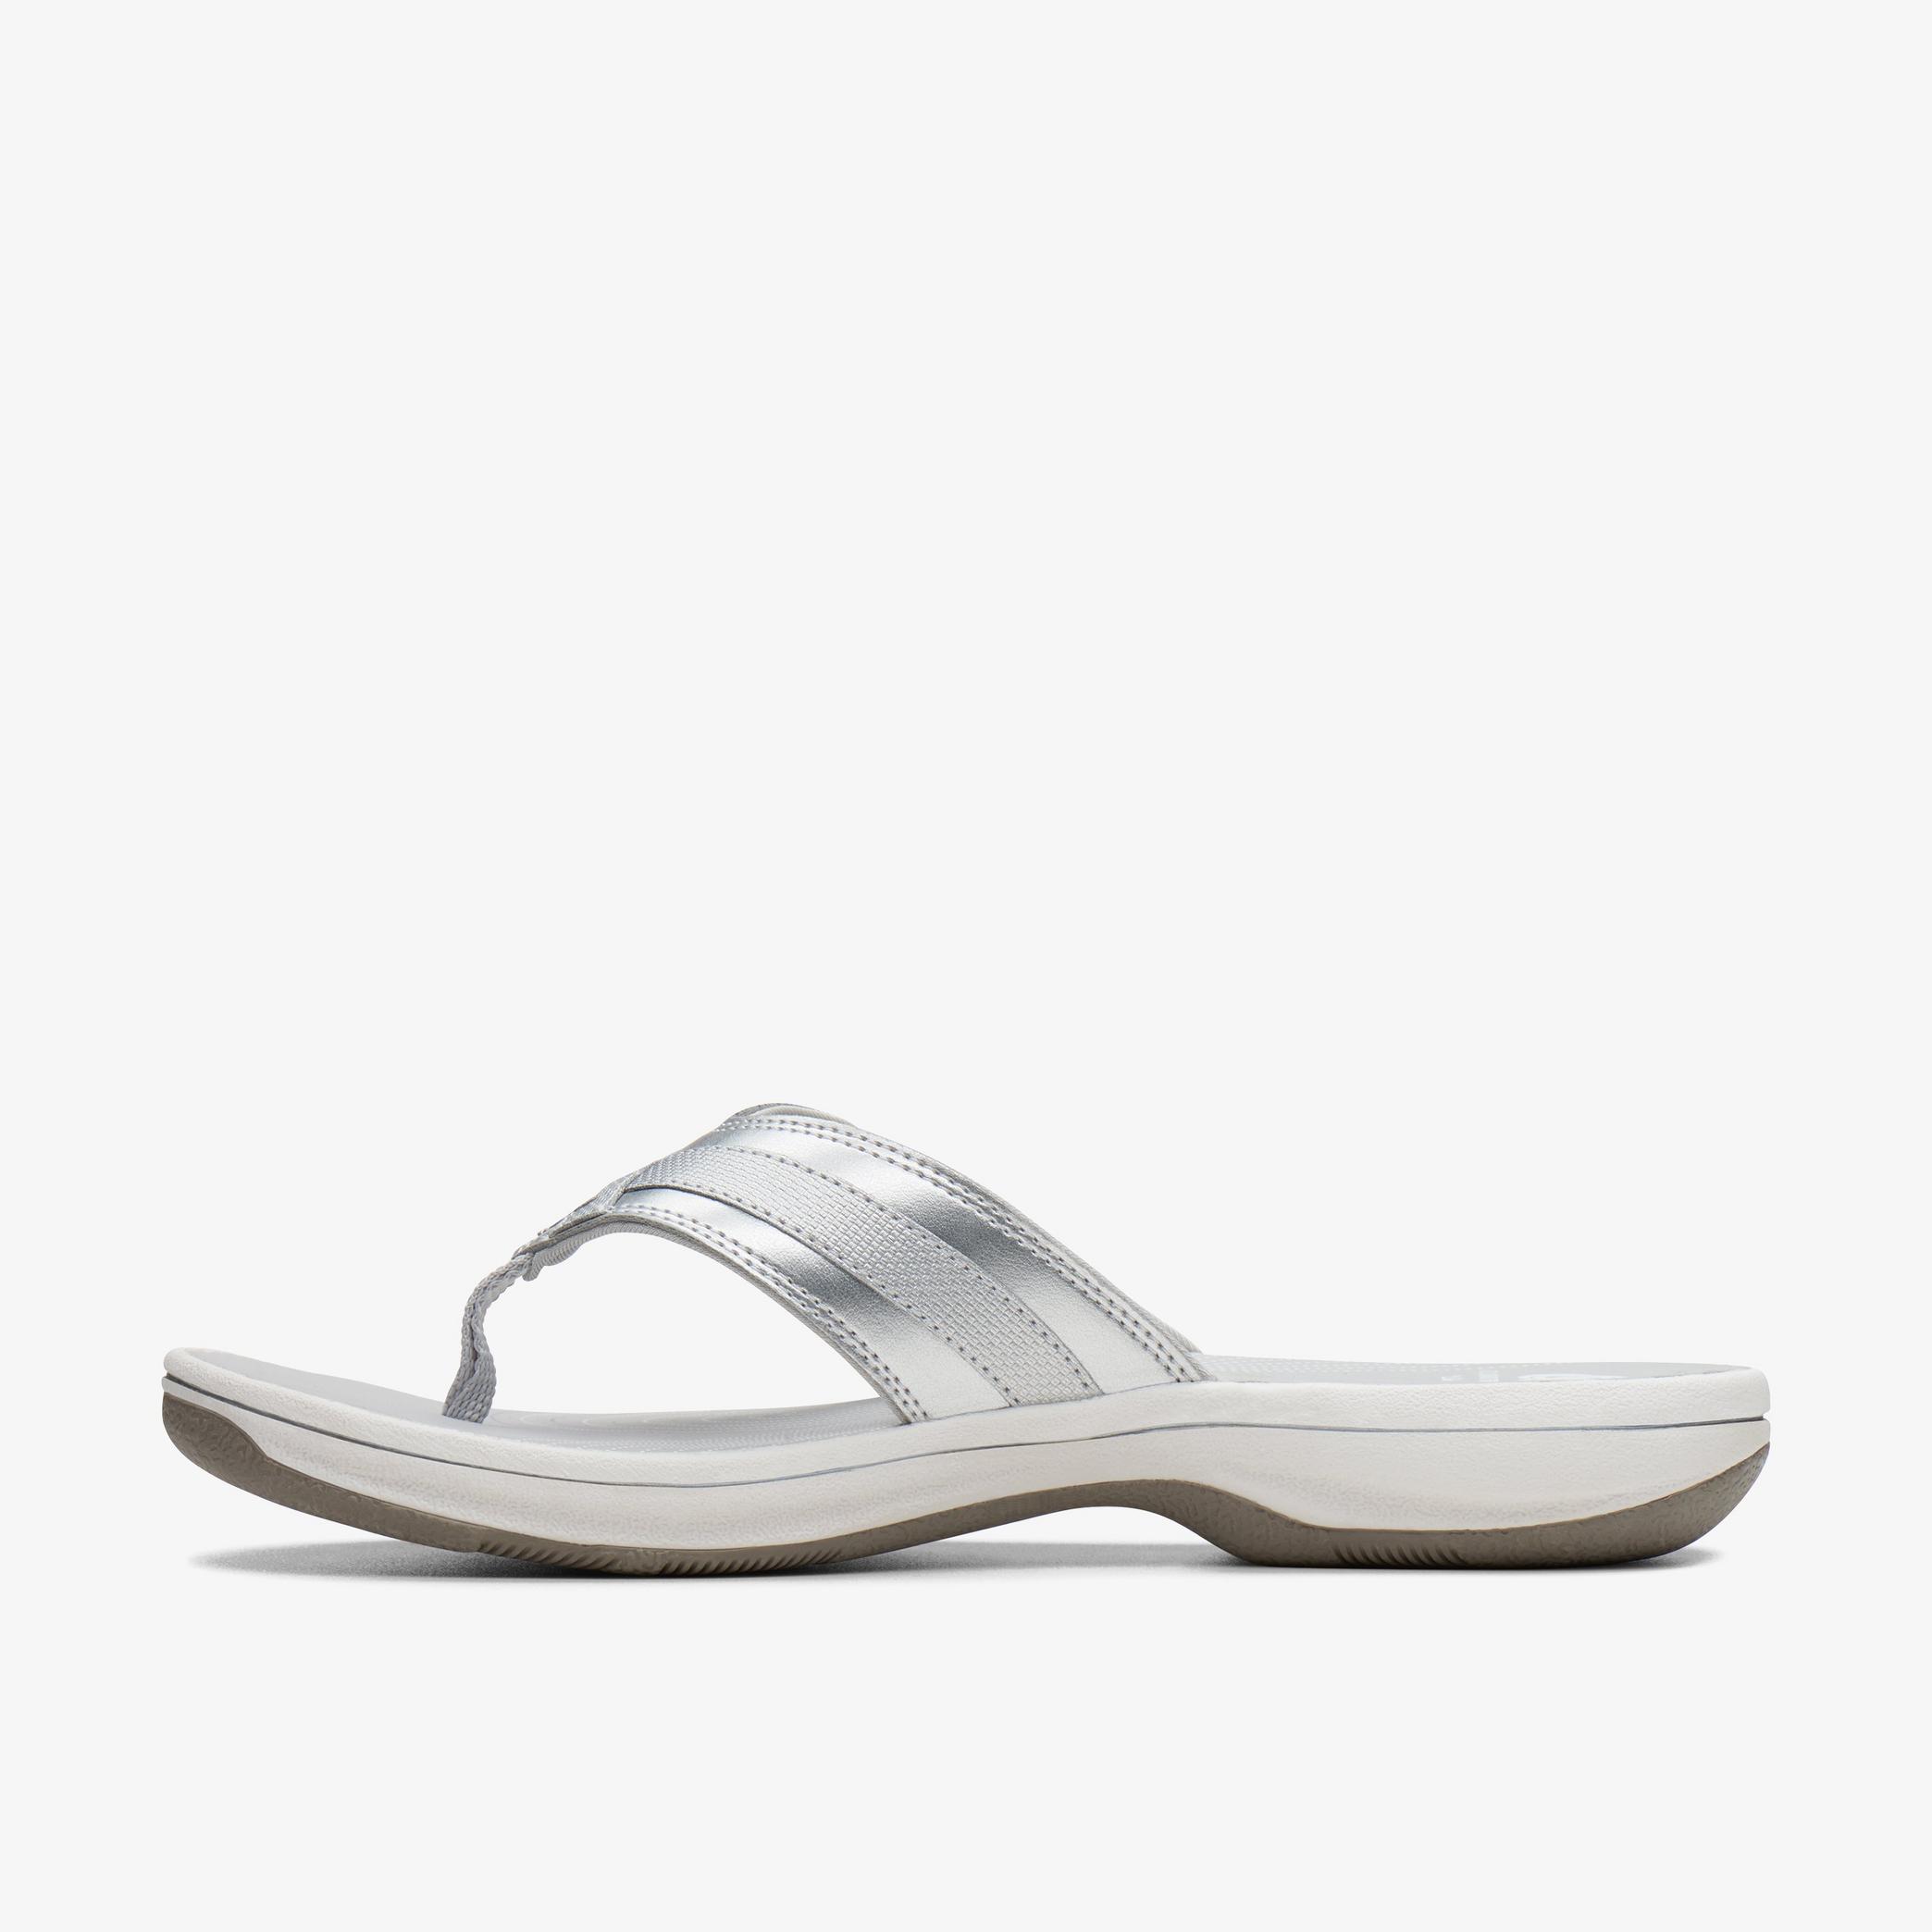 BREEZE SEA Silver Synthetic Flip Flop, view 2 of 6